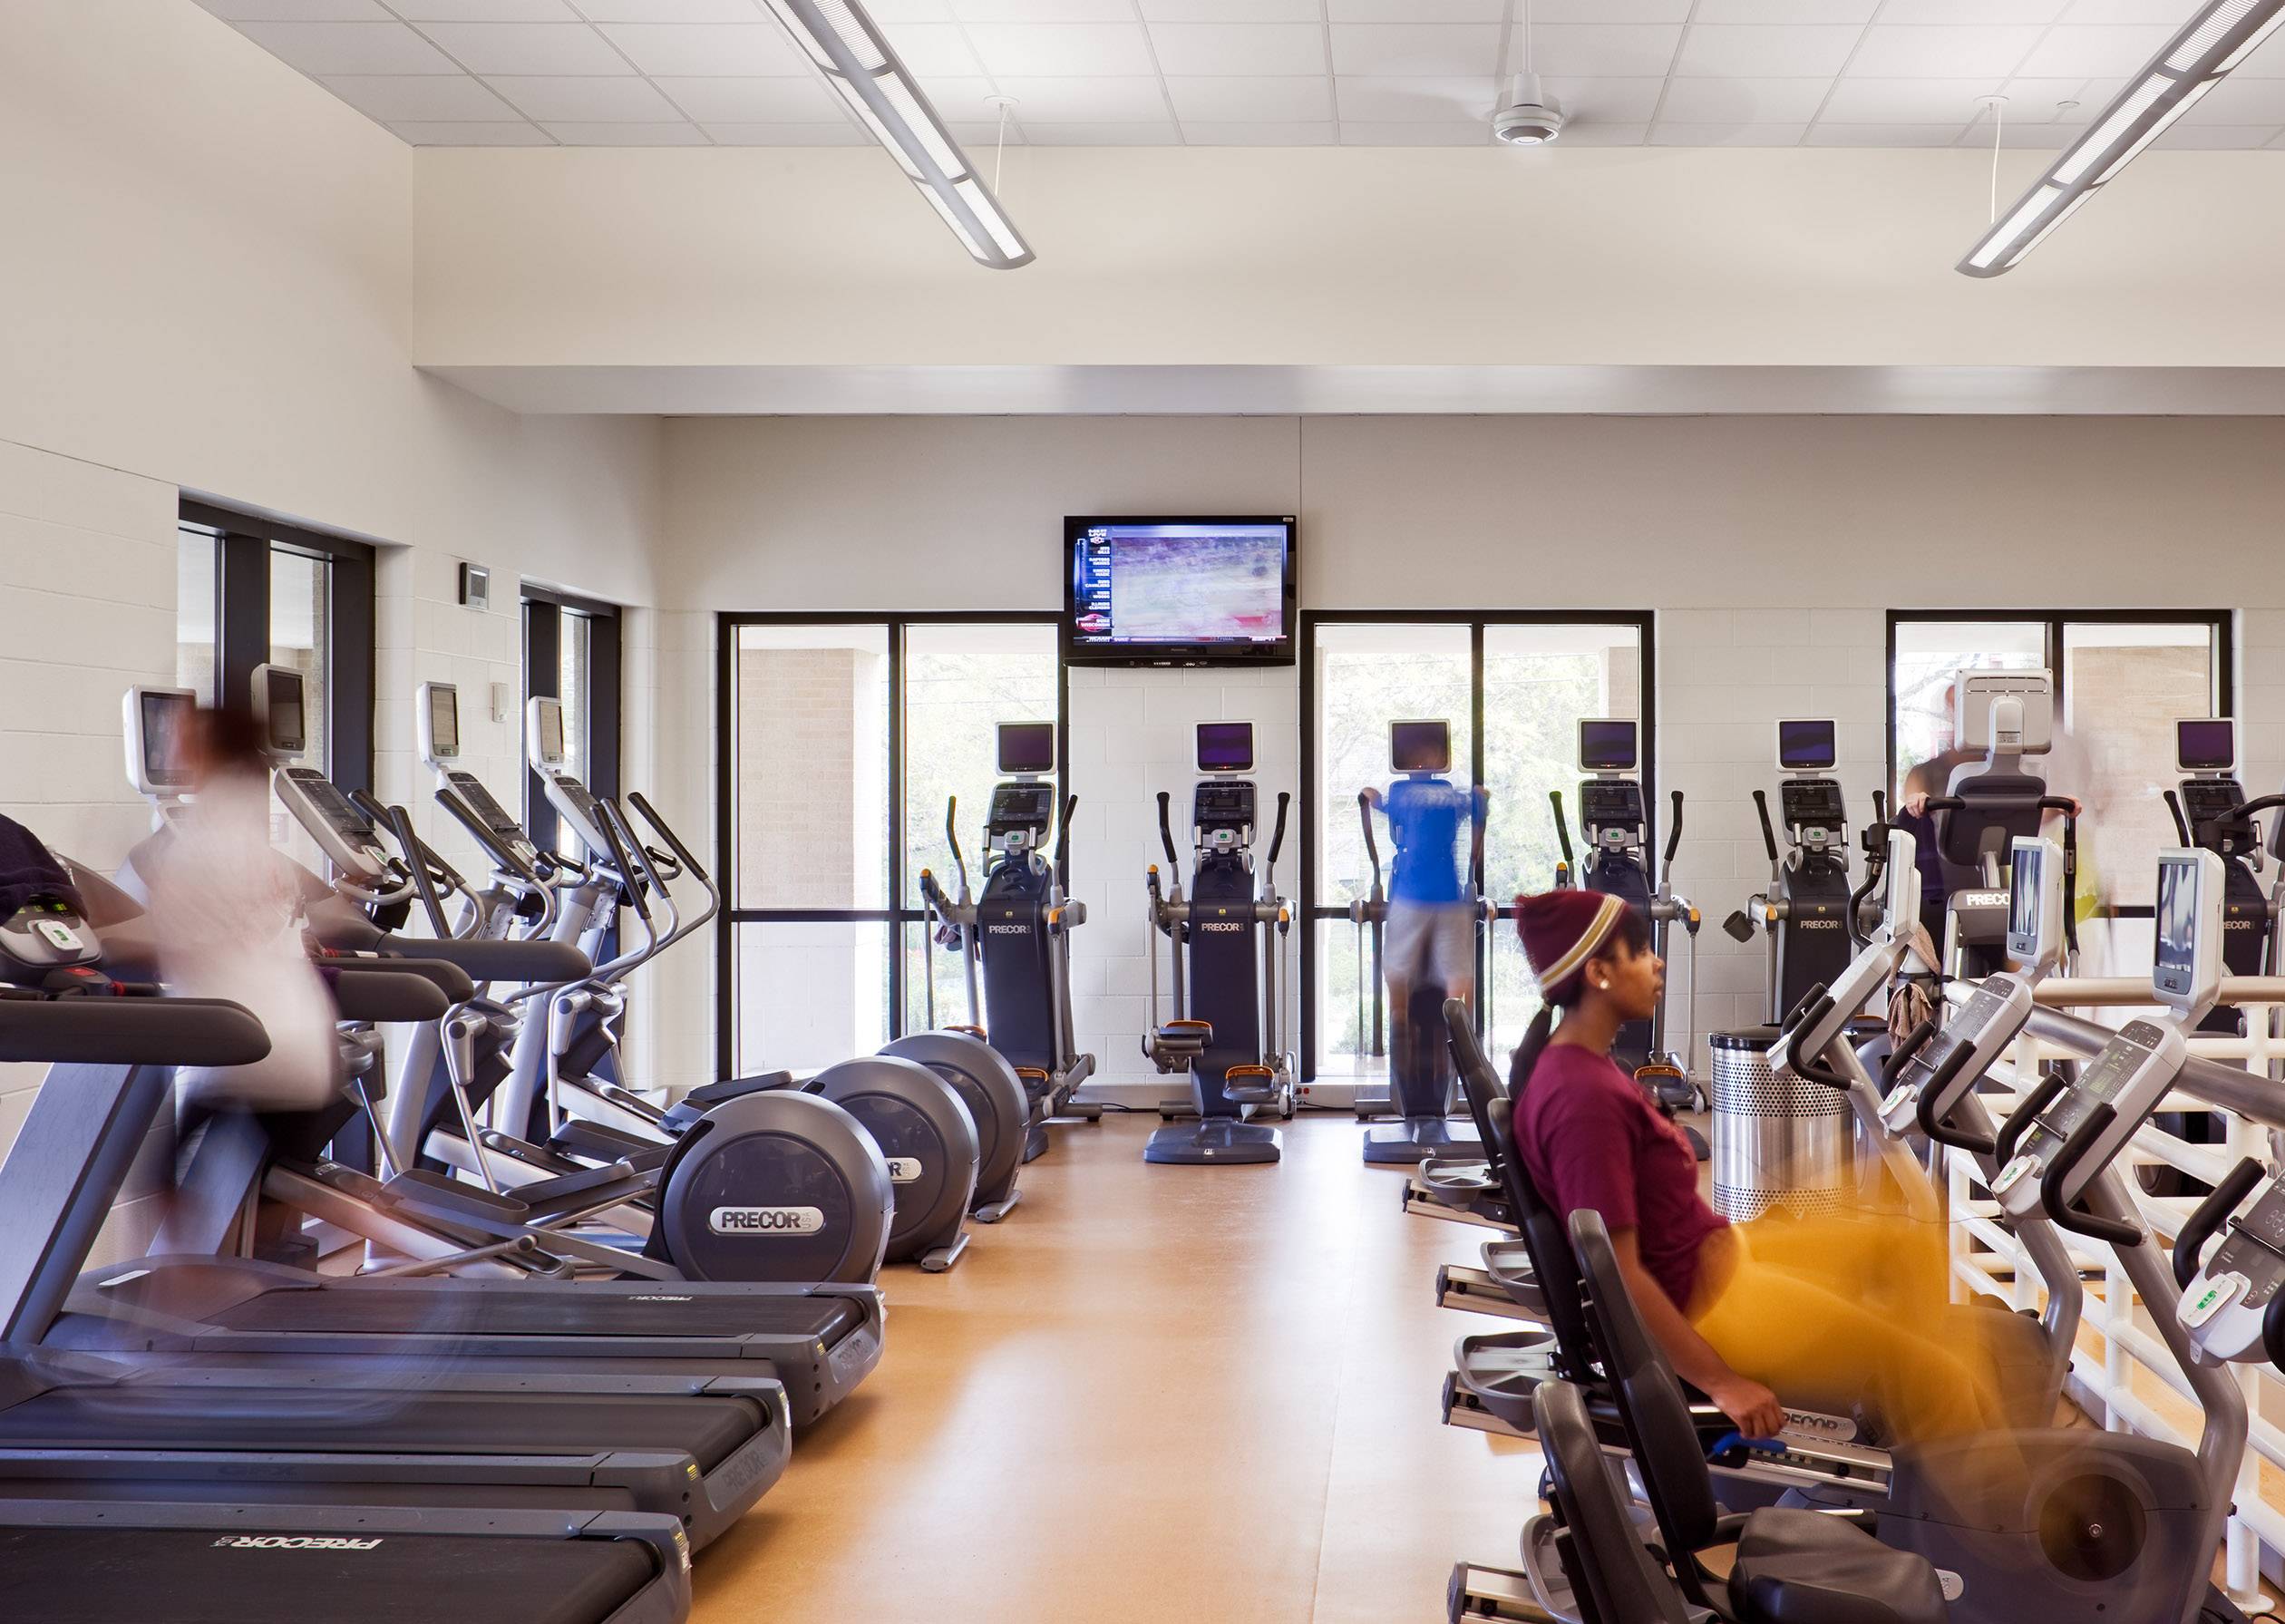 The cardio section the the Student Recreation Center.